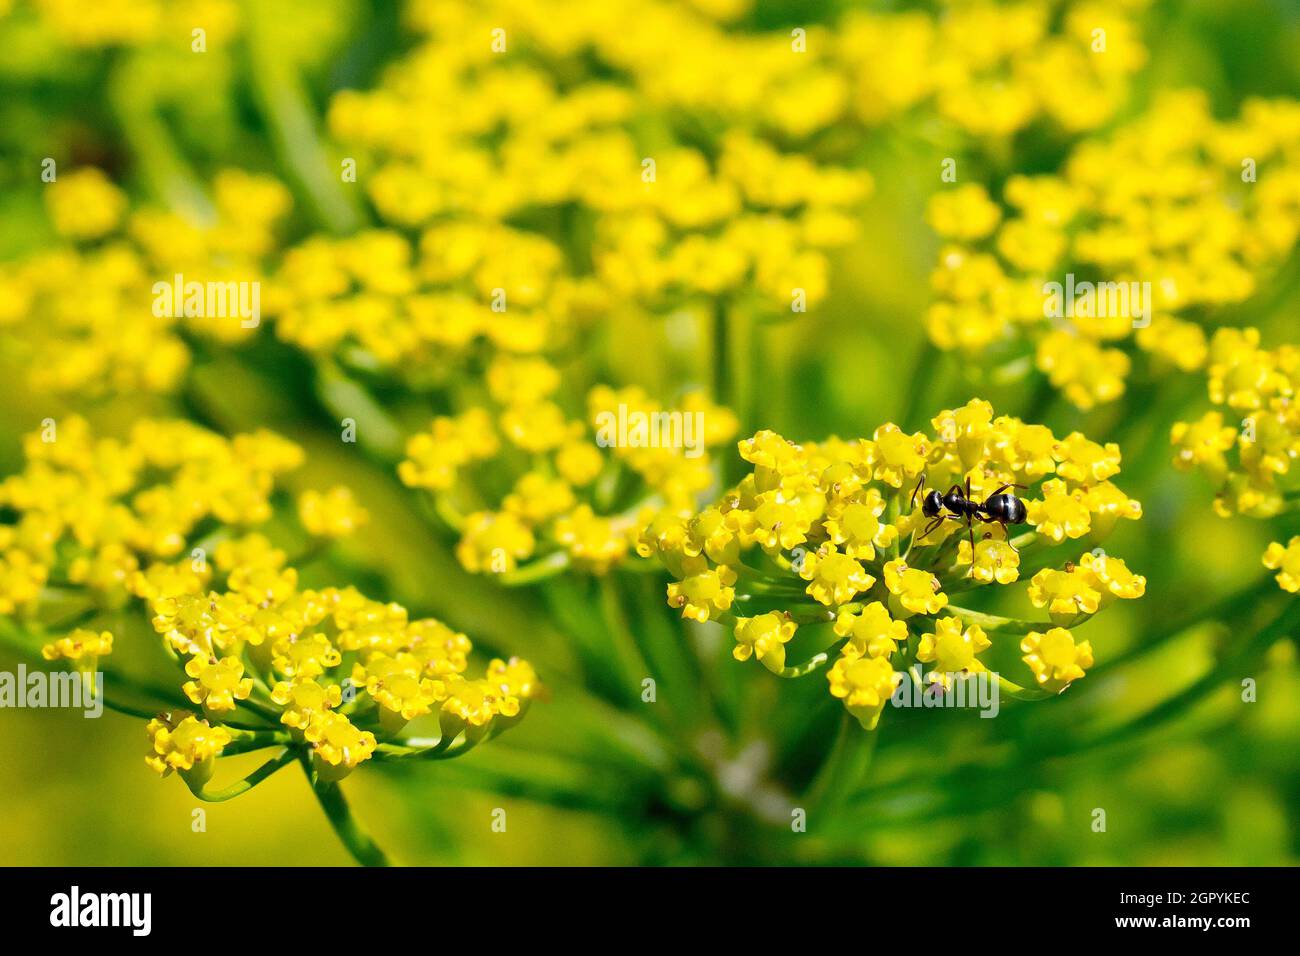 Wild Parsnip (pastinaca sativa), close up showing the small yellow florets of the plant with attendant ant, possibly Small Black Ant (lasius niger). Stock Photo